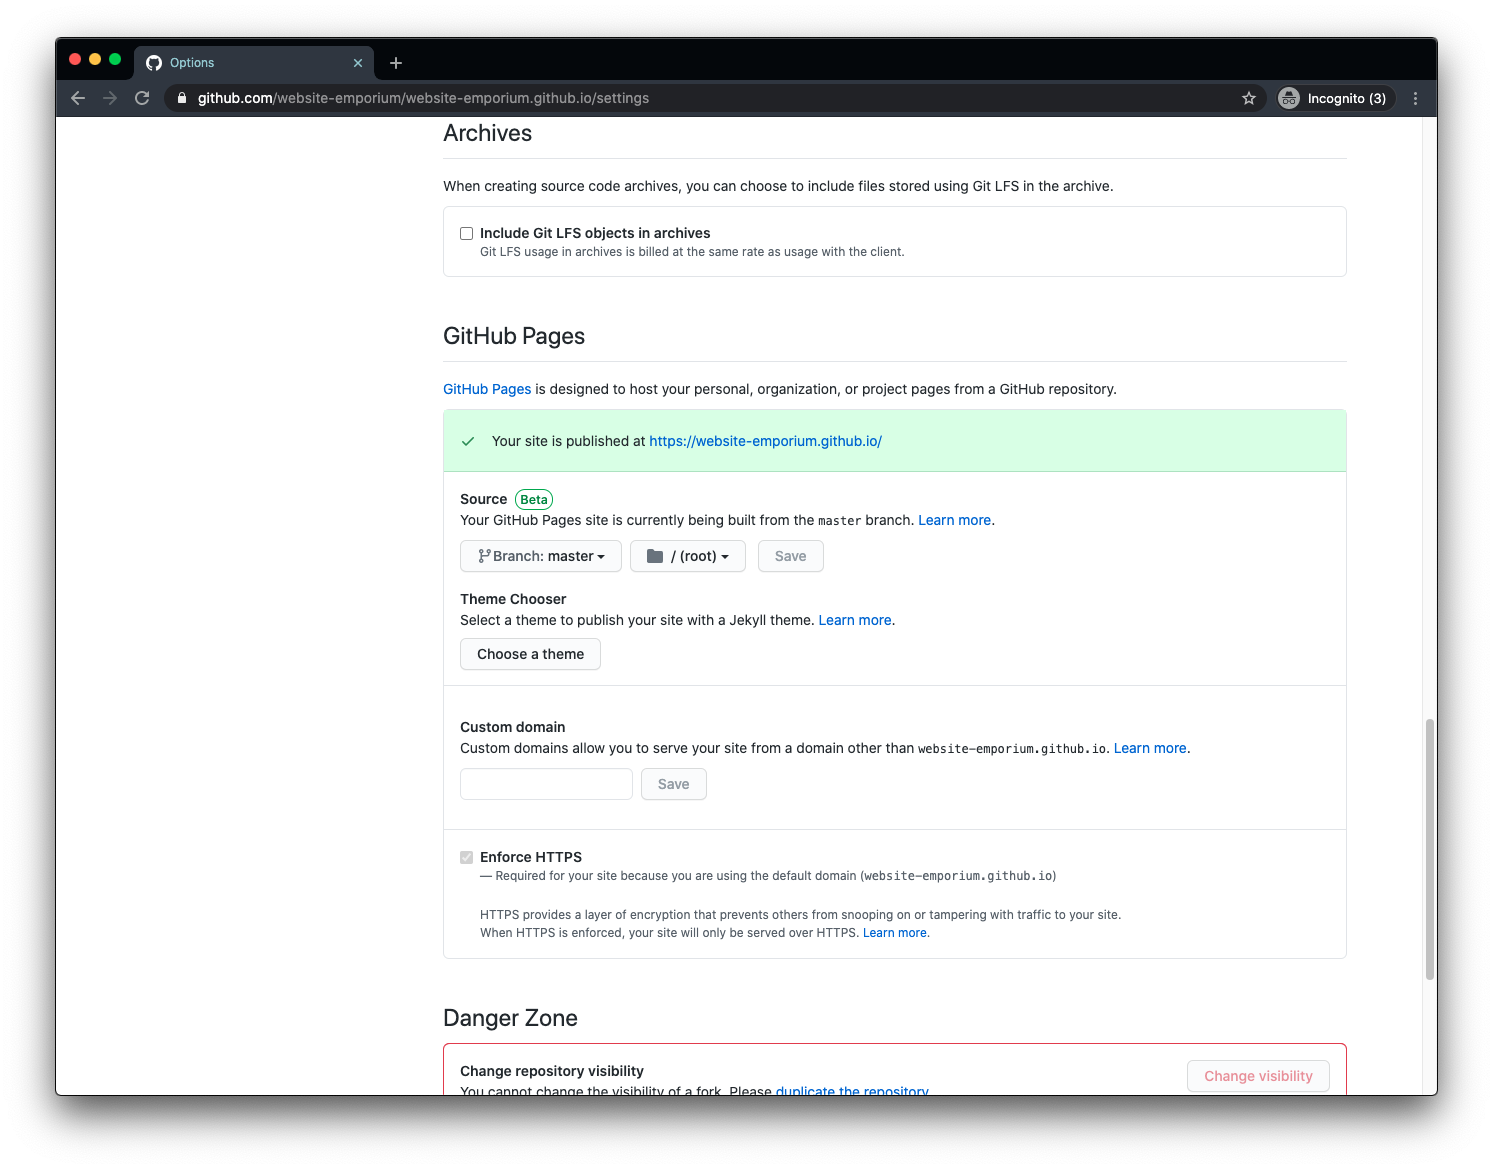 Github letting someone know that their repository has been deployed through Github pages